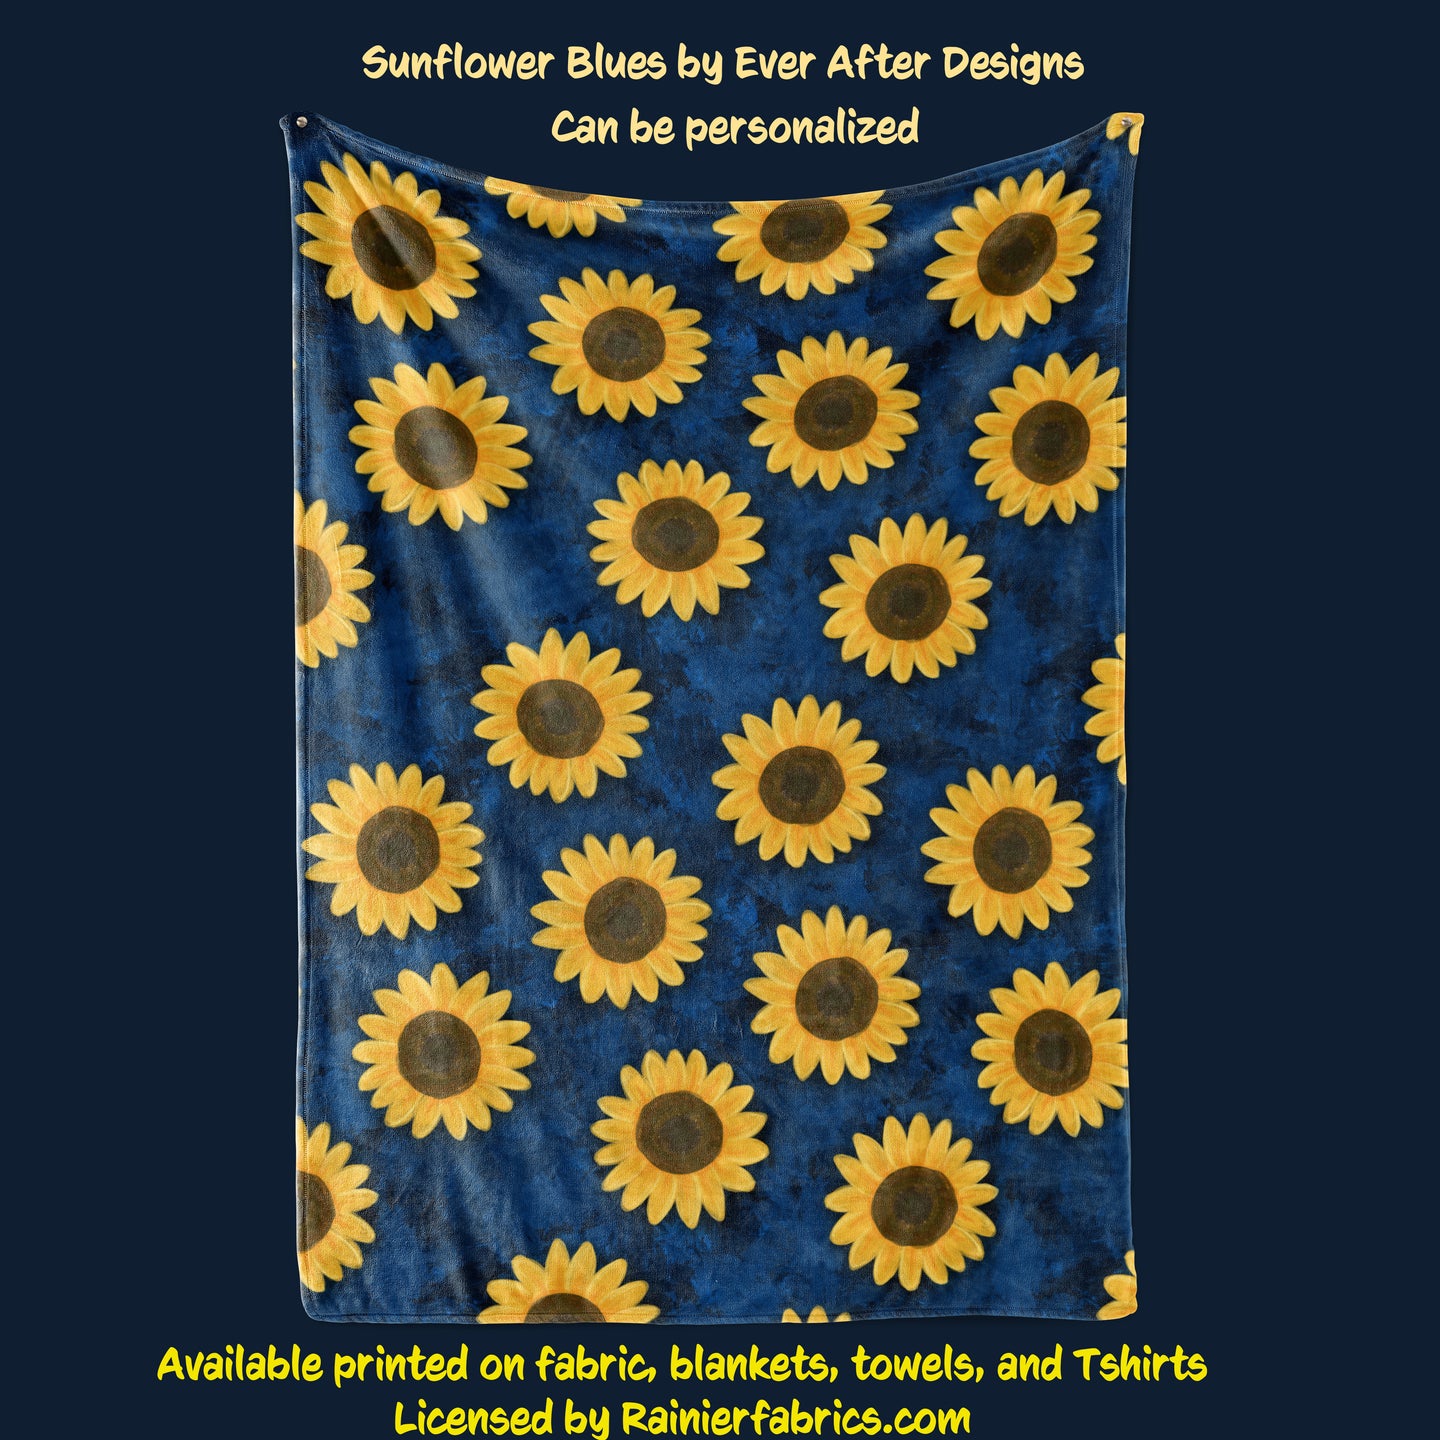 Sunflower Blues by Ever After Designs - Blanket